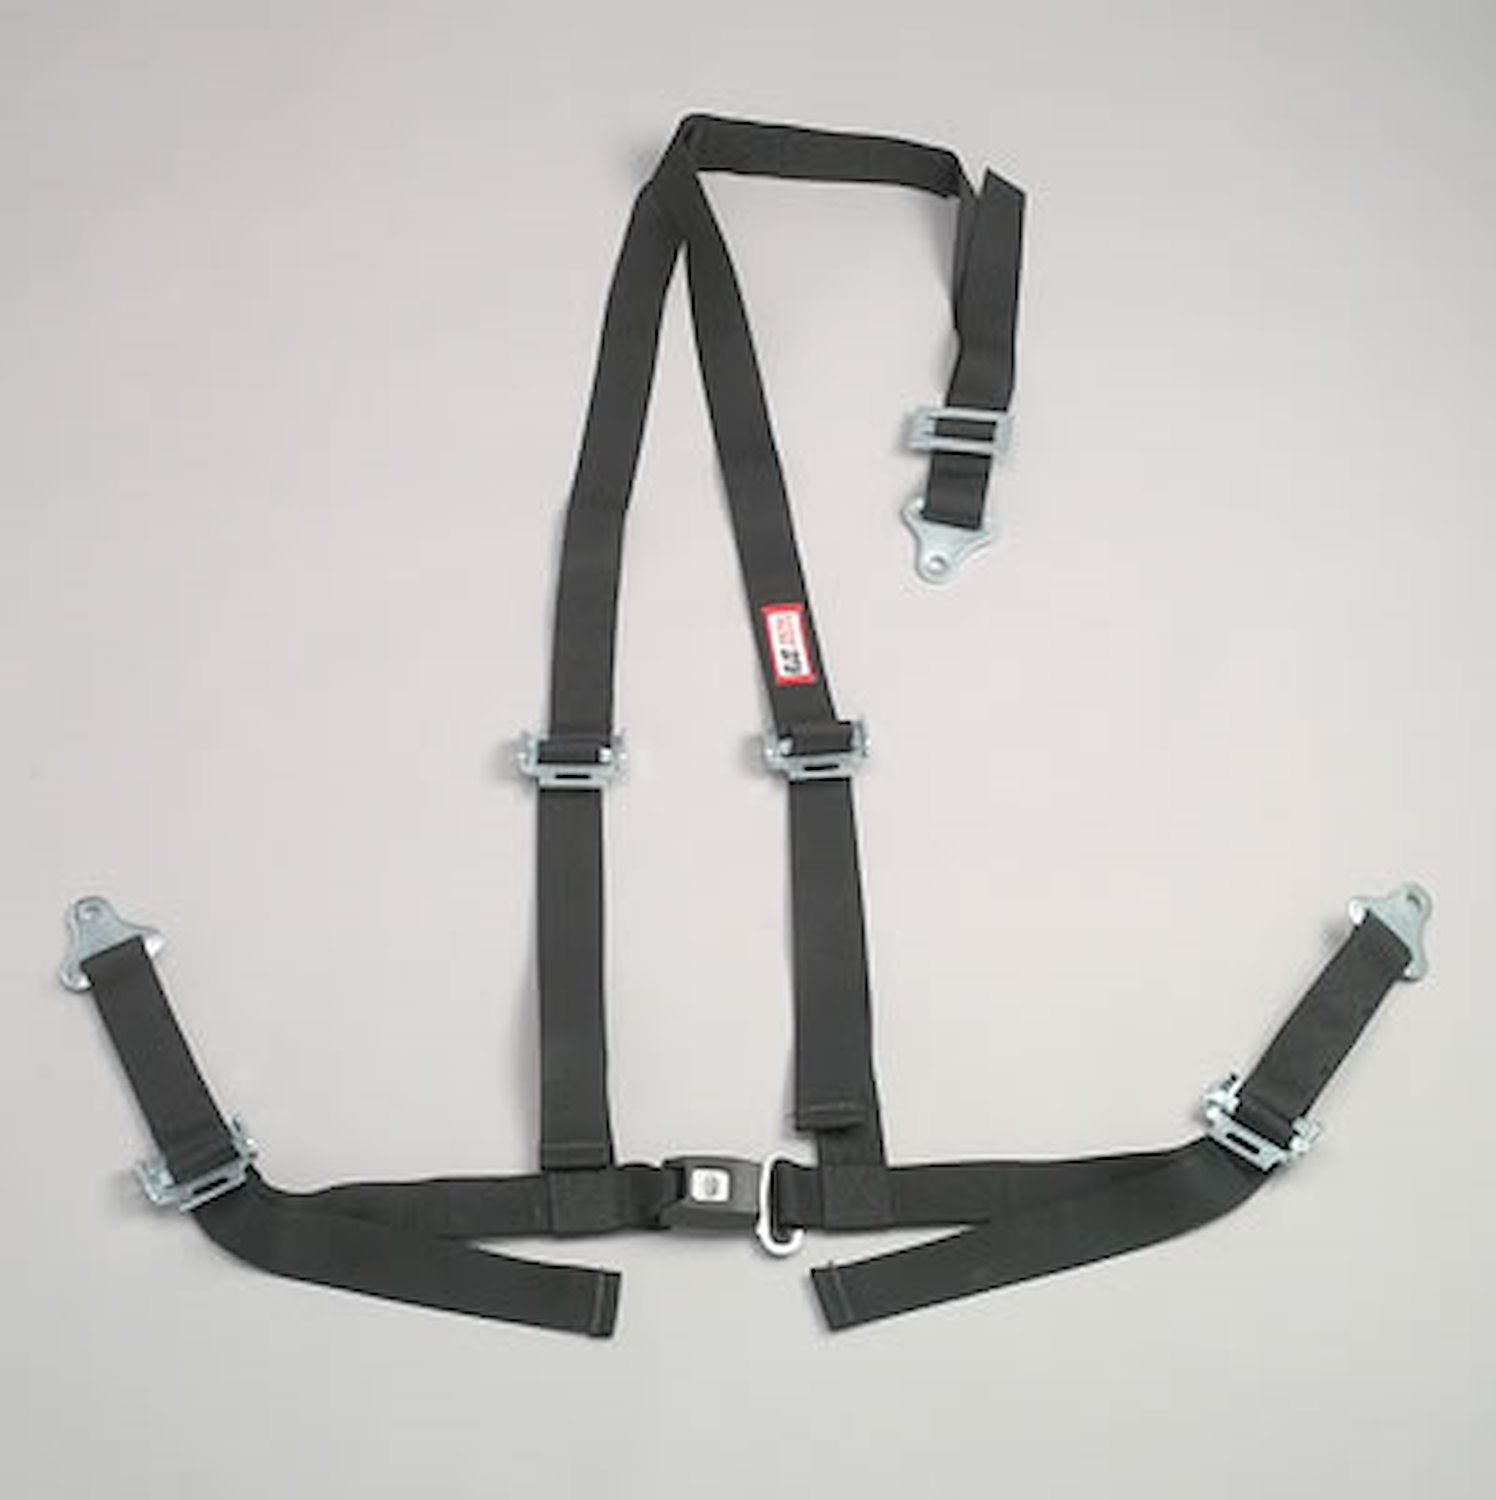 NON-SFI B&T HARNESS 2 PULL UP Lap Belt 2 S. H. Individual FLOOR Mount ALL WRAP ENDS w/STERNUM STRAP KHAKI